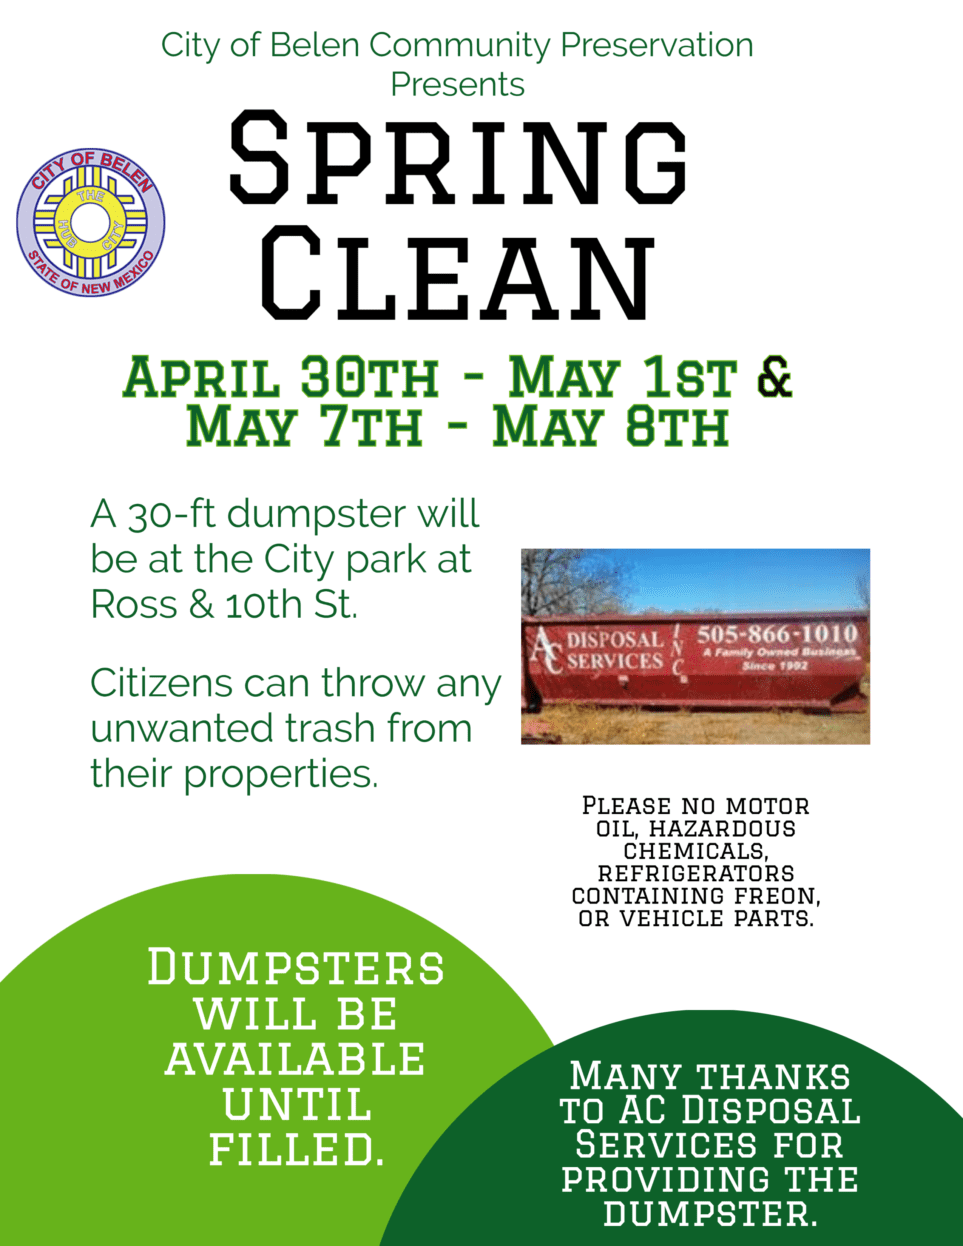 On April 30th through May 1st and again on May 7th through May 8th there will be a 30 foot dumpster courtesy of the City of Belen and AC Disposal Company at the Park on 10th and Ross Streets. Citizens can throw any unwanted trash from their properties. Dumpsters will be available until filled. Please no motor oil, hazardous chemicals, refrigerators with freon, or vehicle parts.